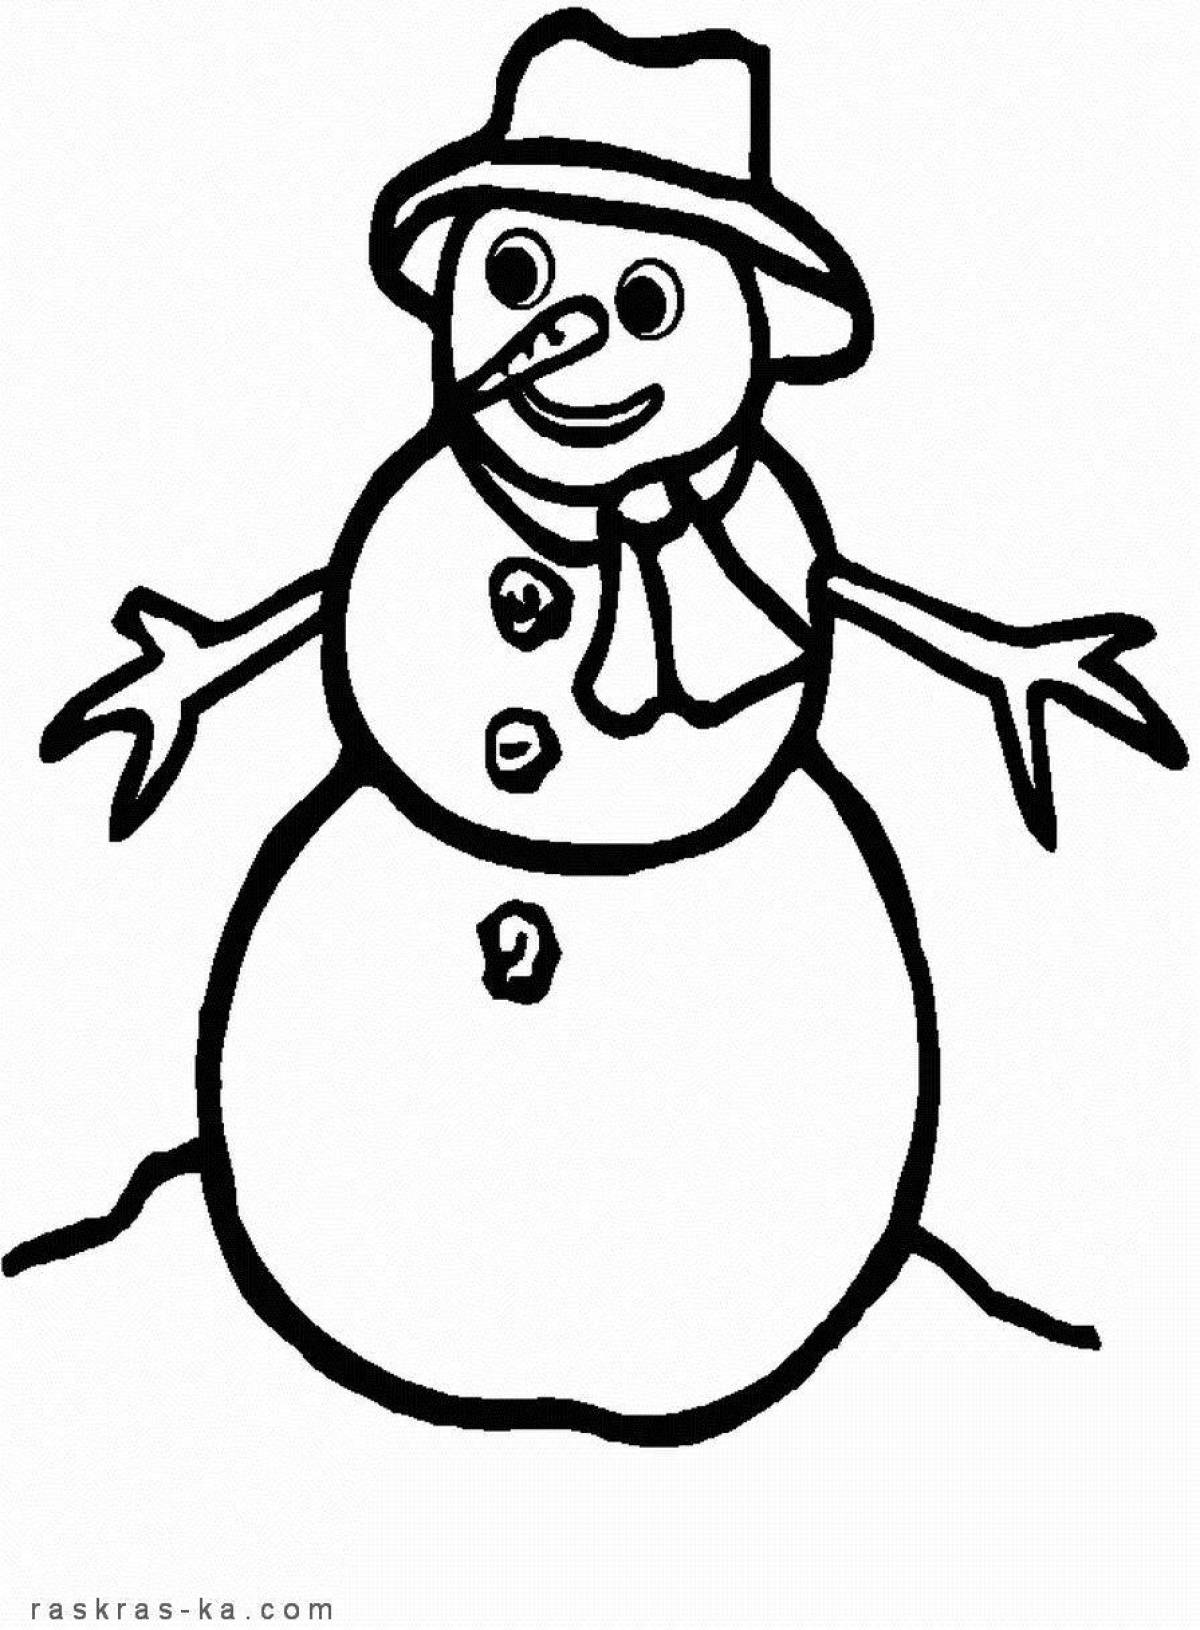 Animated snowman coloring book for kids